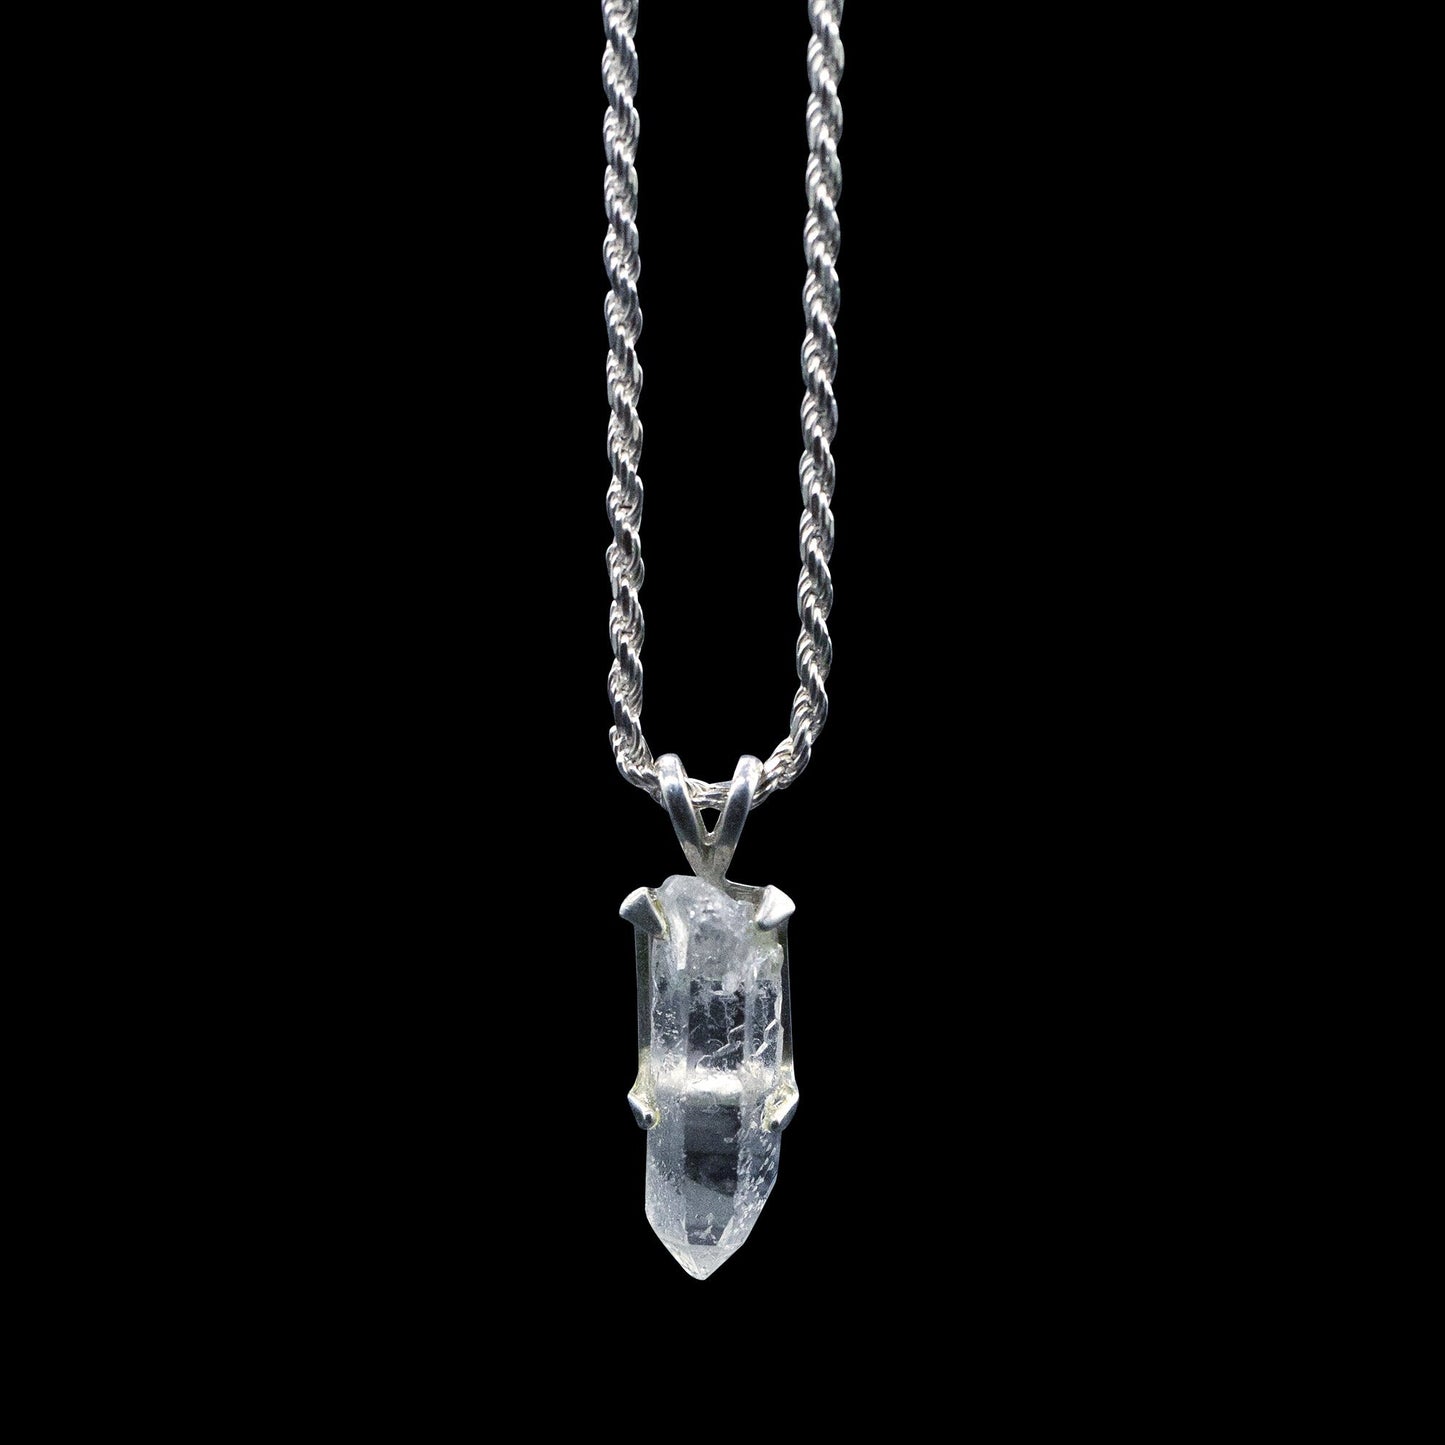 Raw Quartz Point Pendant on Sterling Silver Rope